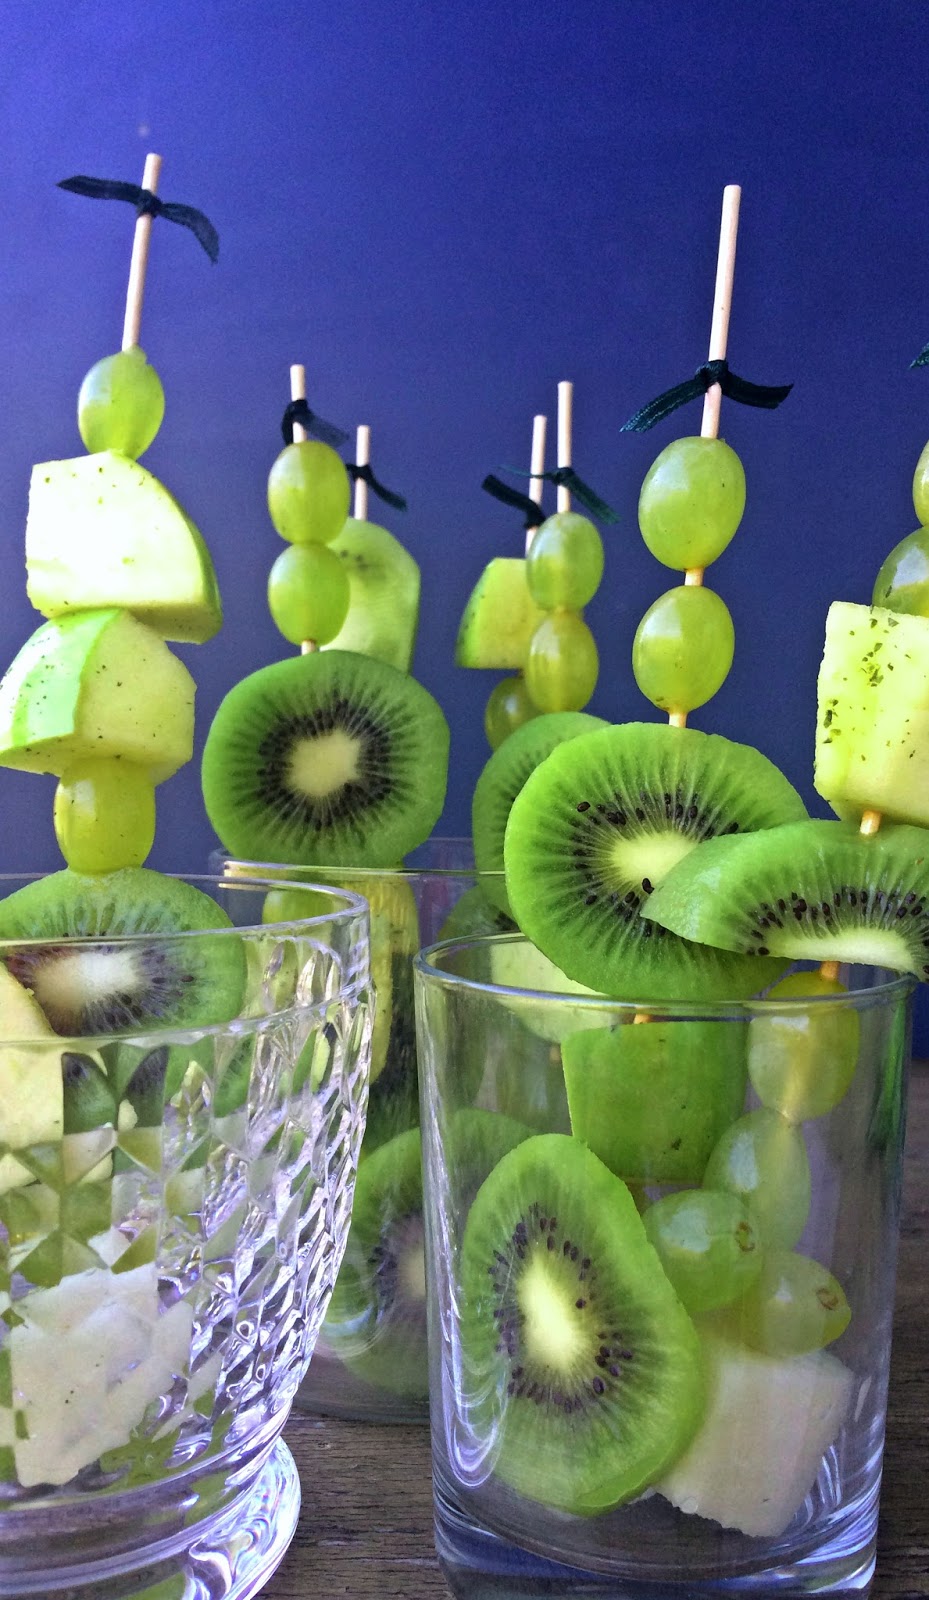 Passionately Raw! : Green Fruit Skewers for St. Patrick's Day Party